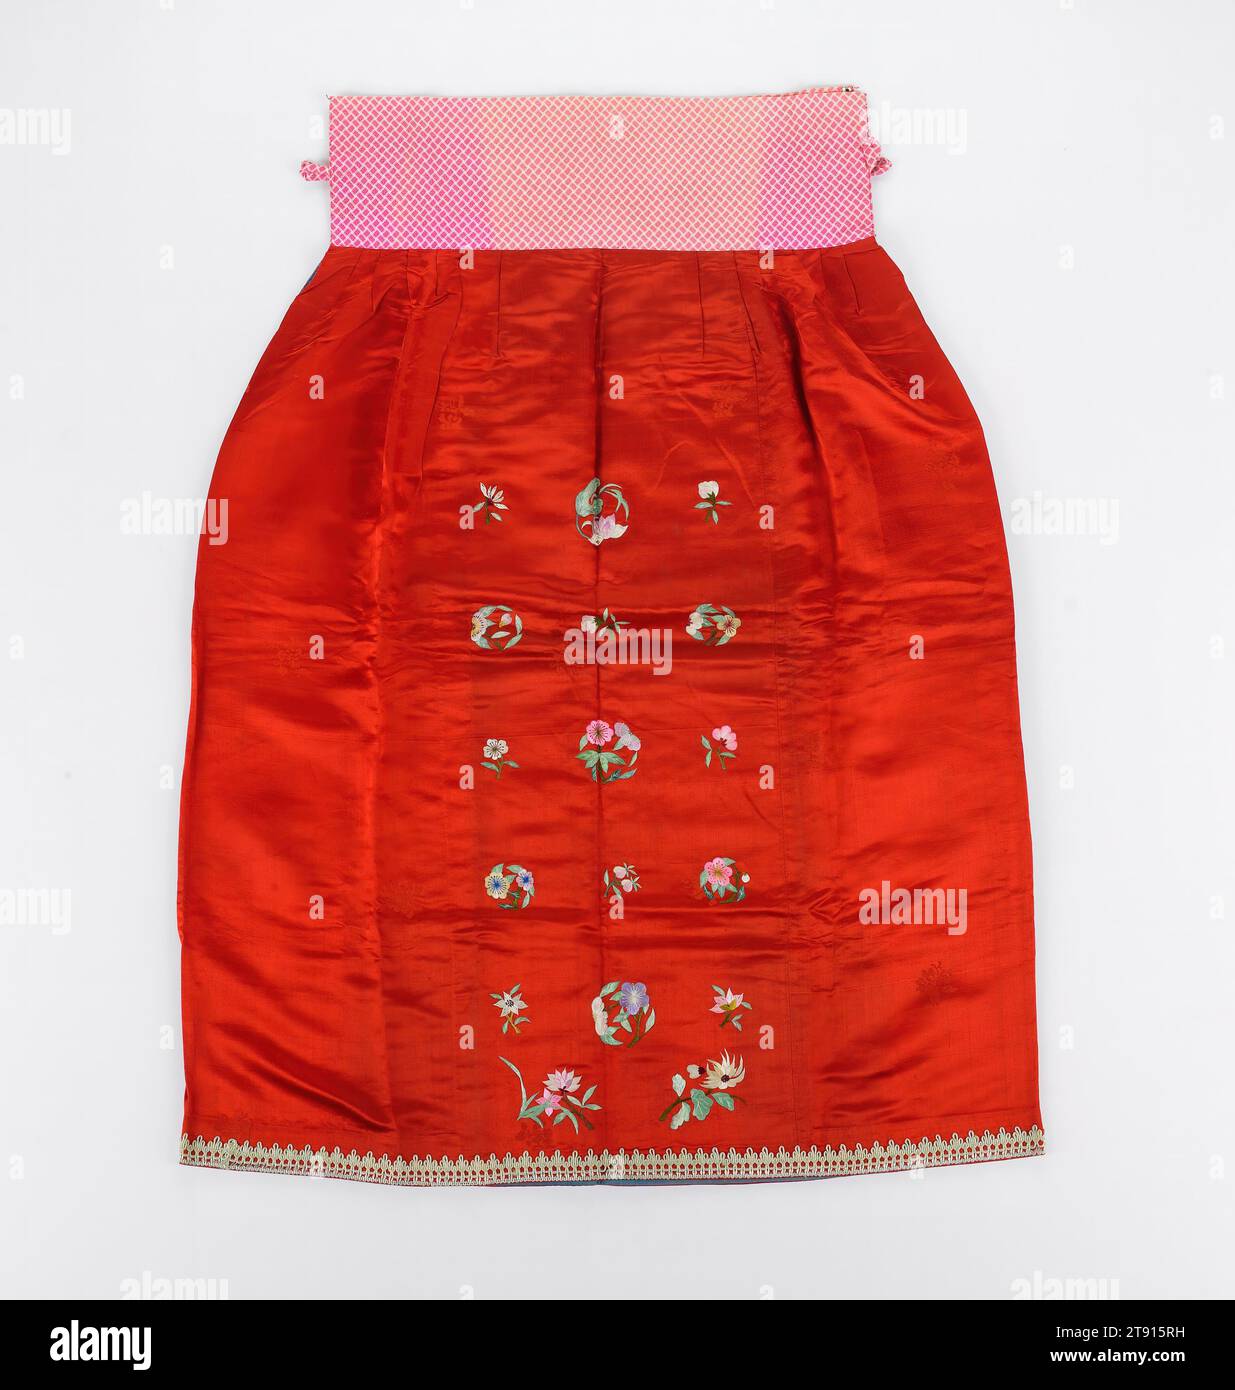 Woman's Festive Wrap Around Skirt, mid 20th century, 36 x 28 1/4 in. (91.44 x 71.8 cm), Silk, cotton, embroidery, China, 20th century Stock Photo